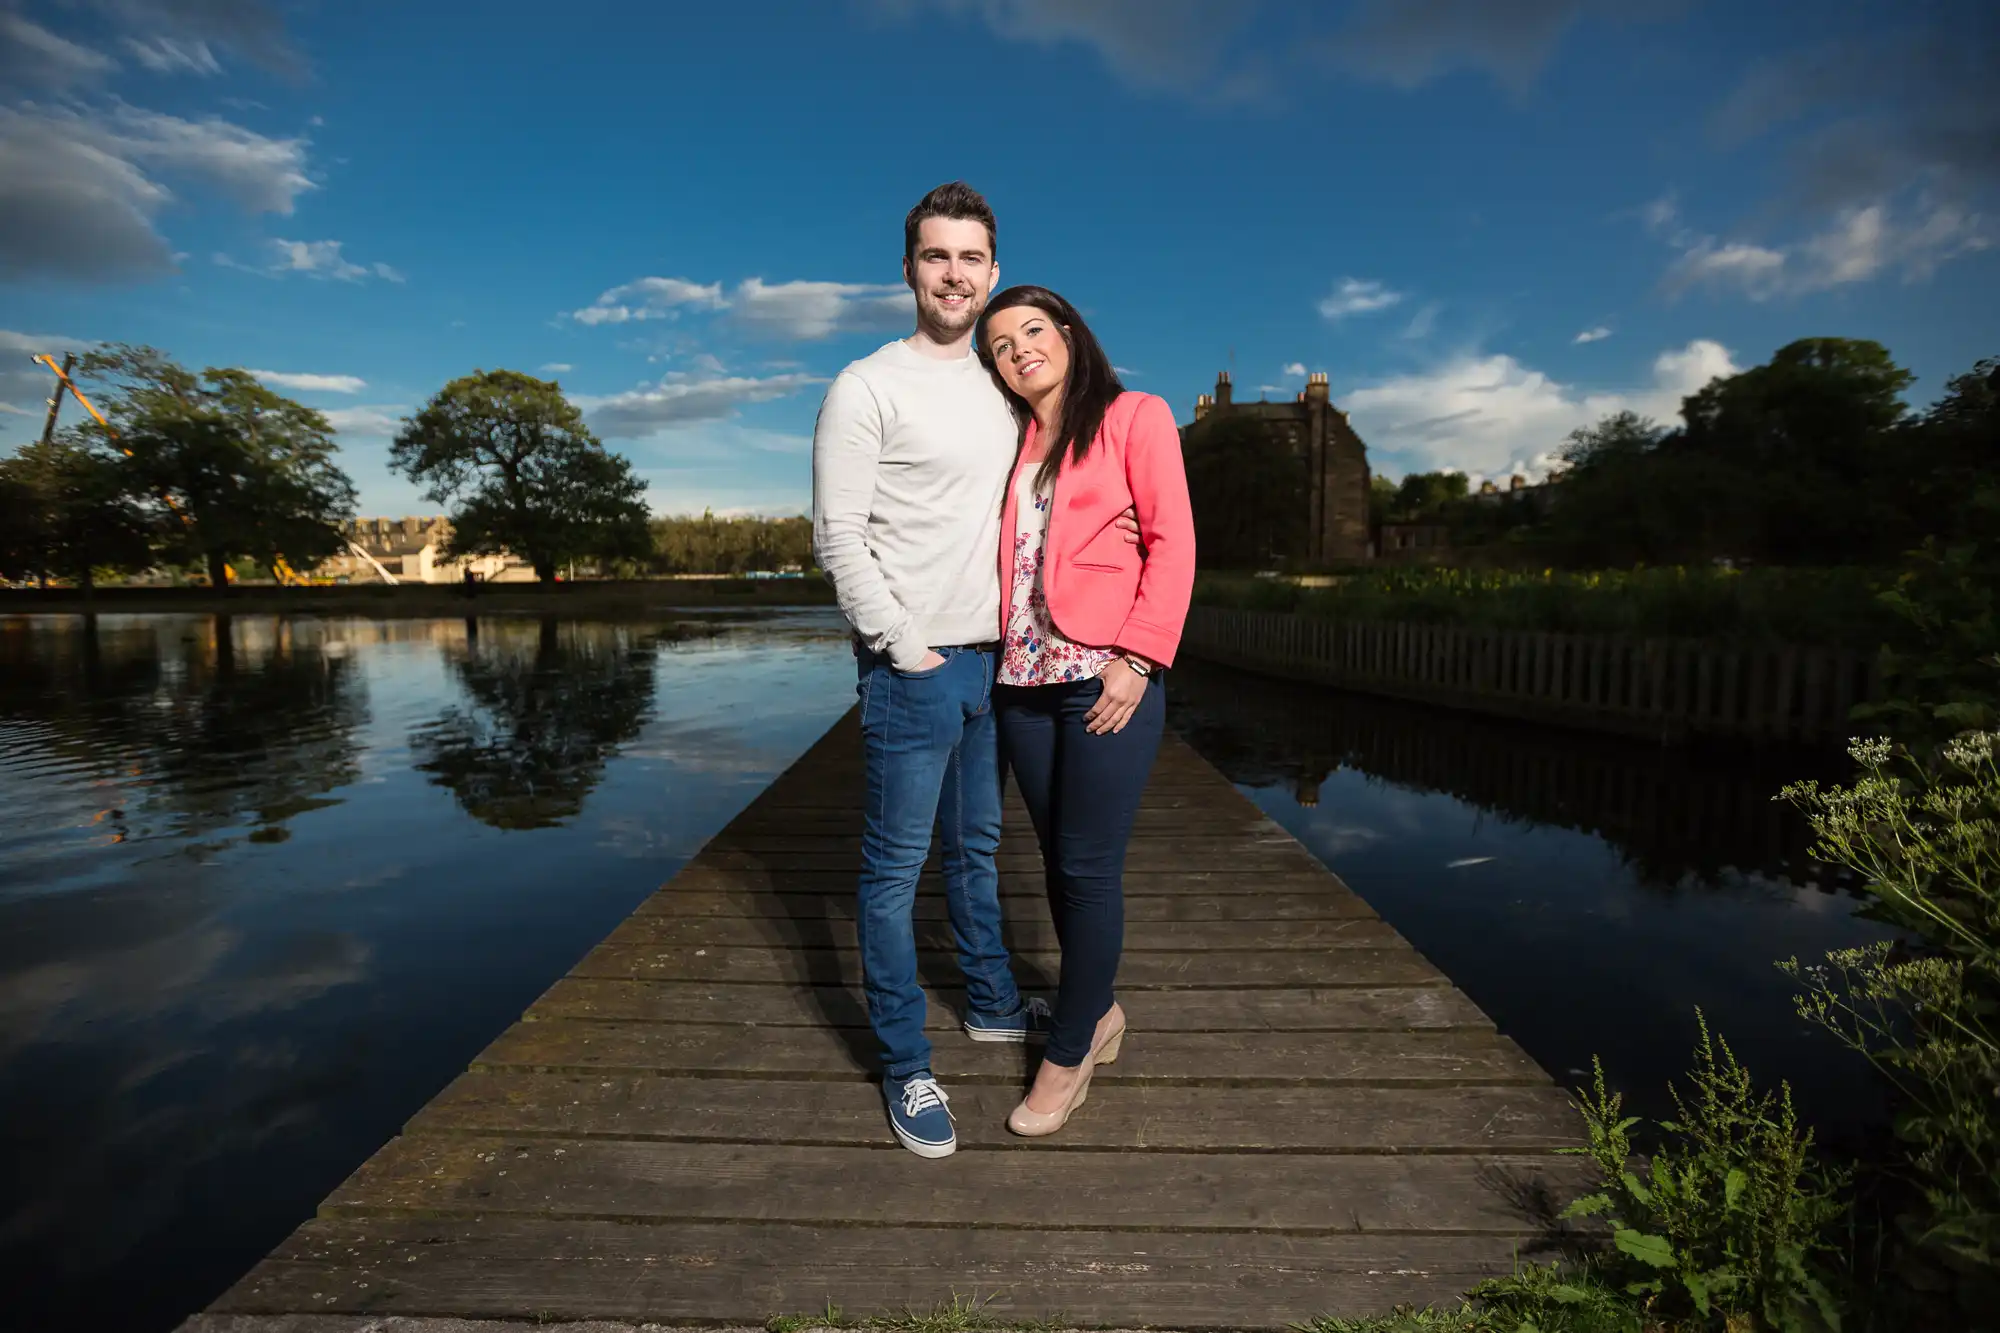 A smiling couple stands together on a wooden pier beside a calm lake, with lush greenery and a cloudy blue sky in the background.